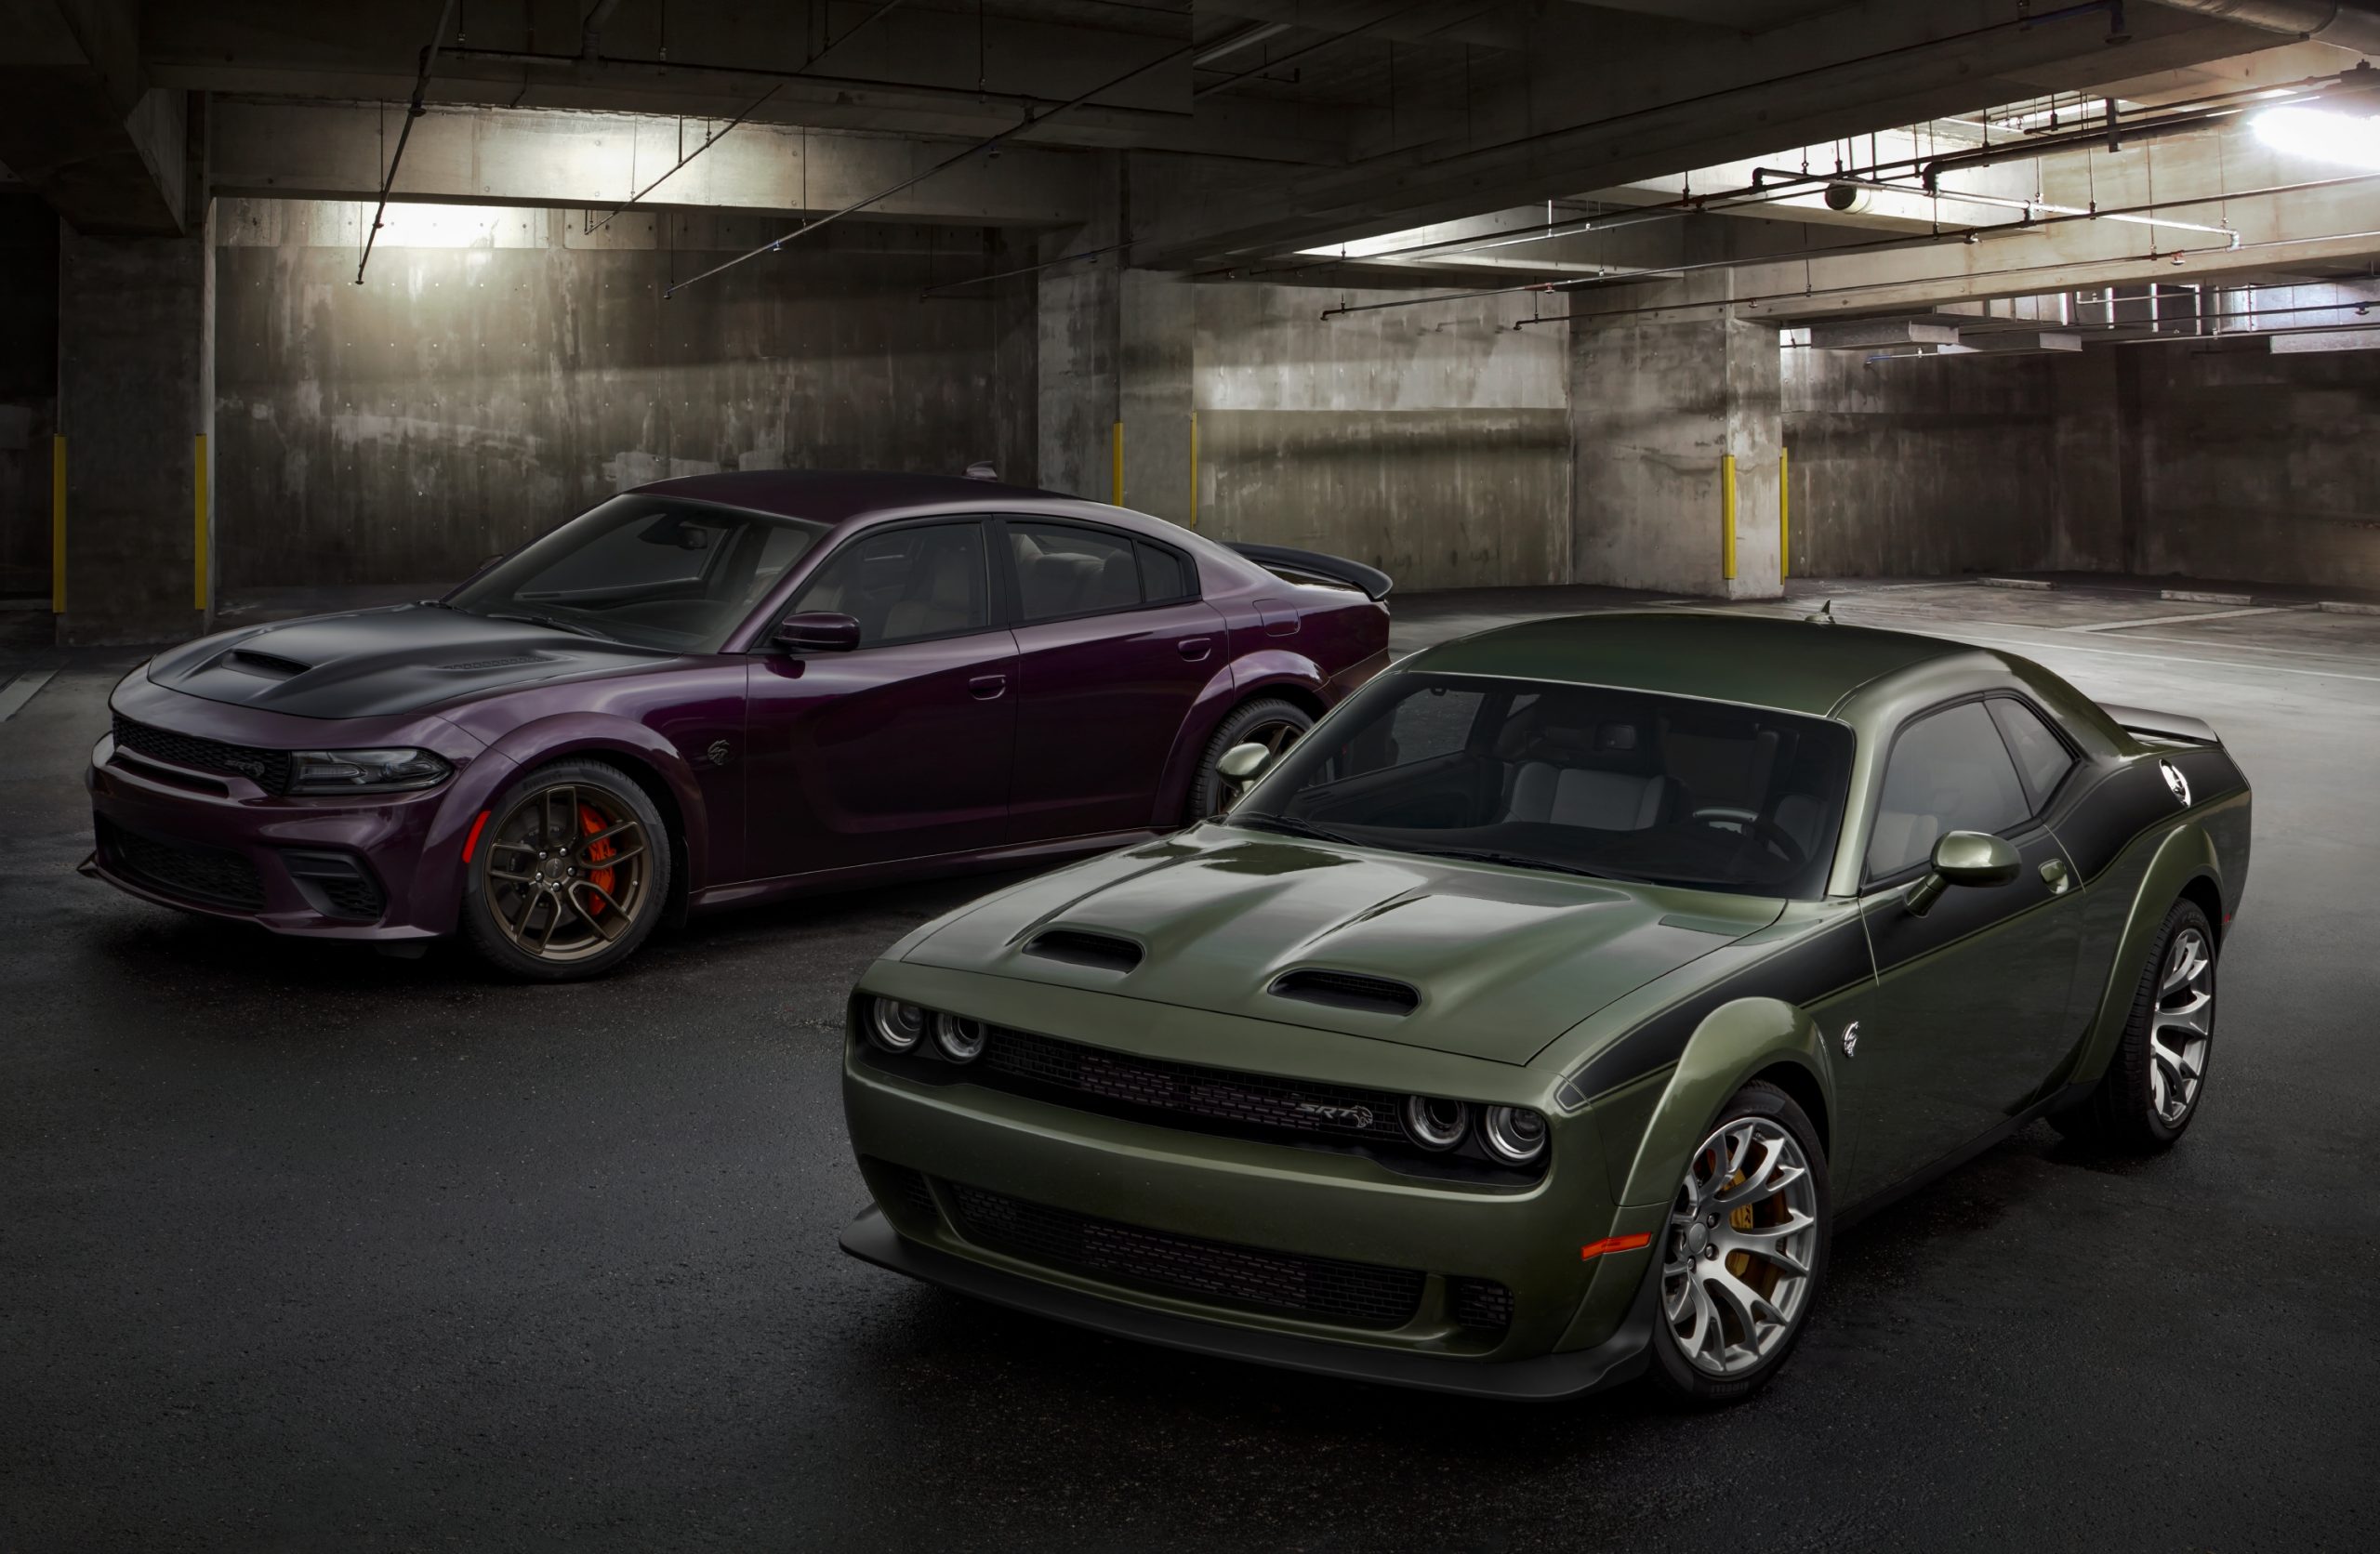 Dodge Challenger and Charger get fully unlocked with 807-hp